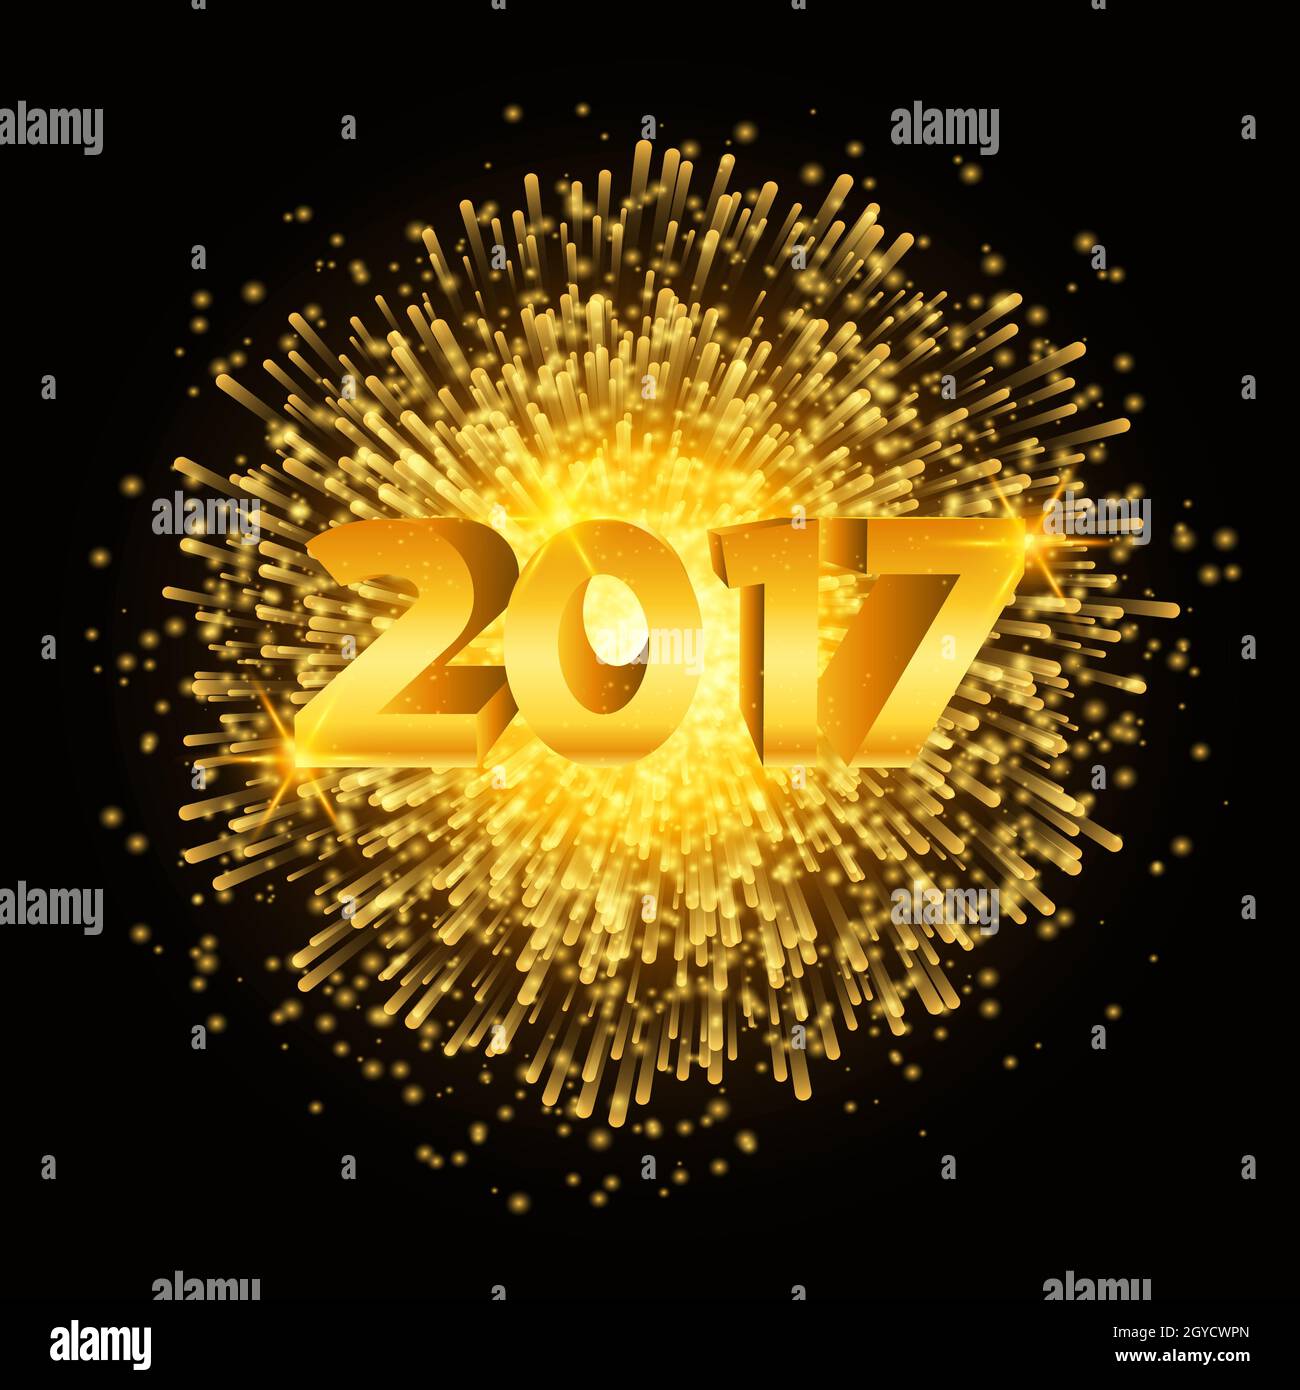 Happy New Year background with golden fireworks Stock Photo